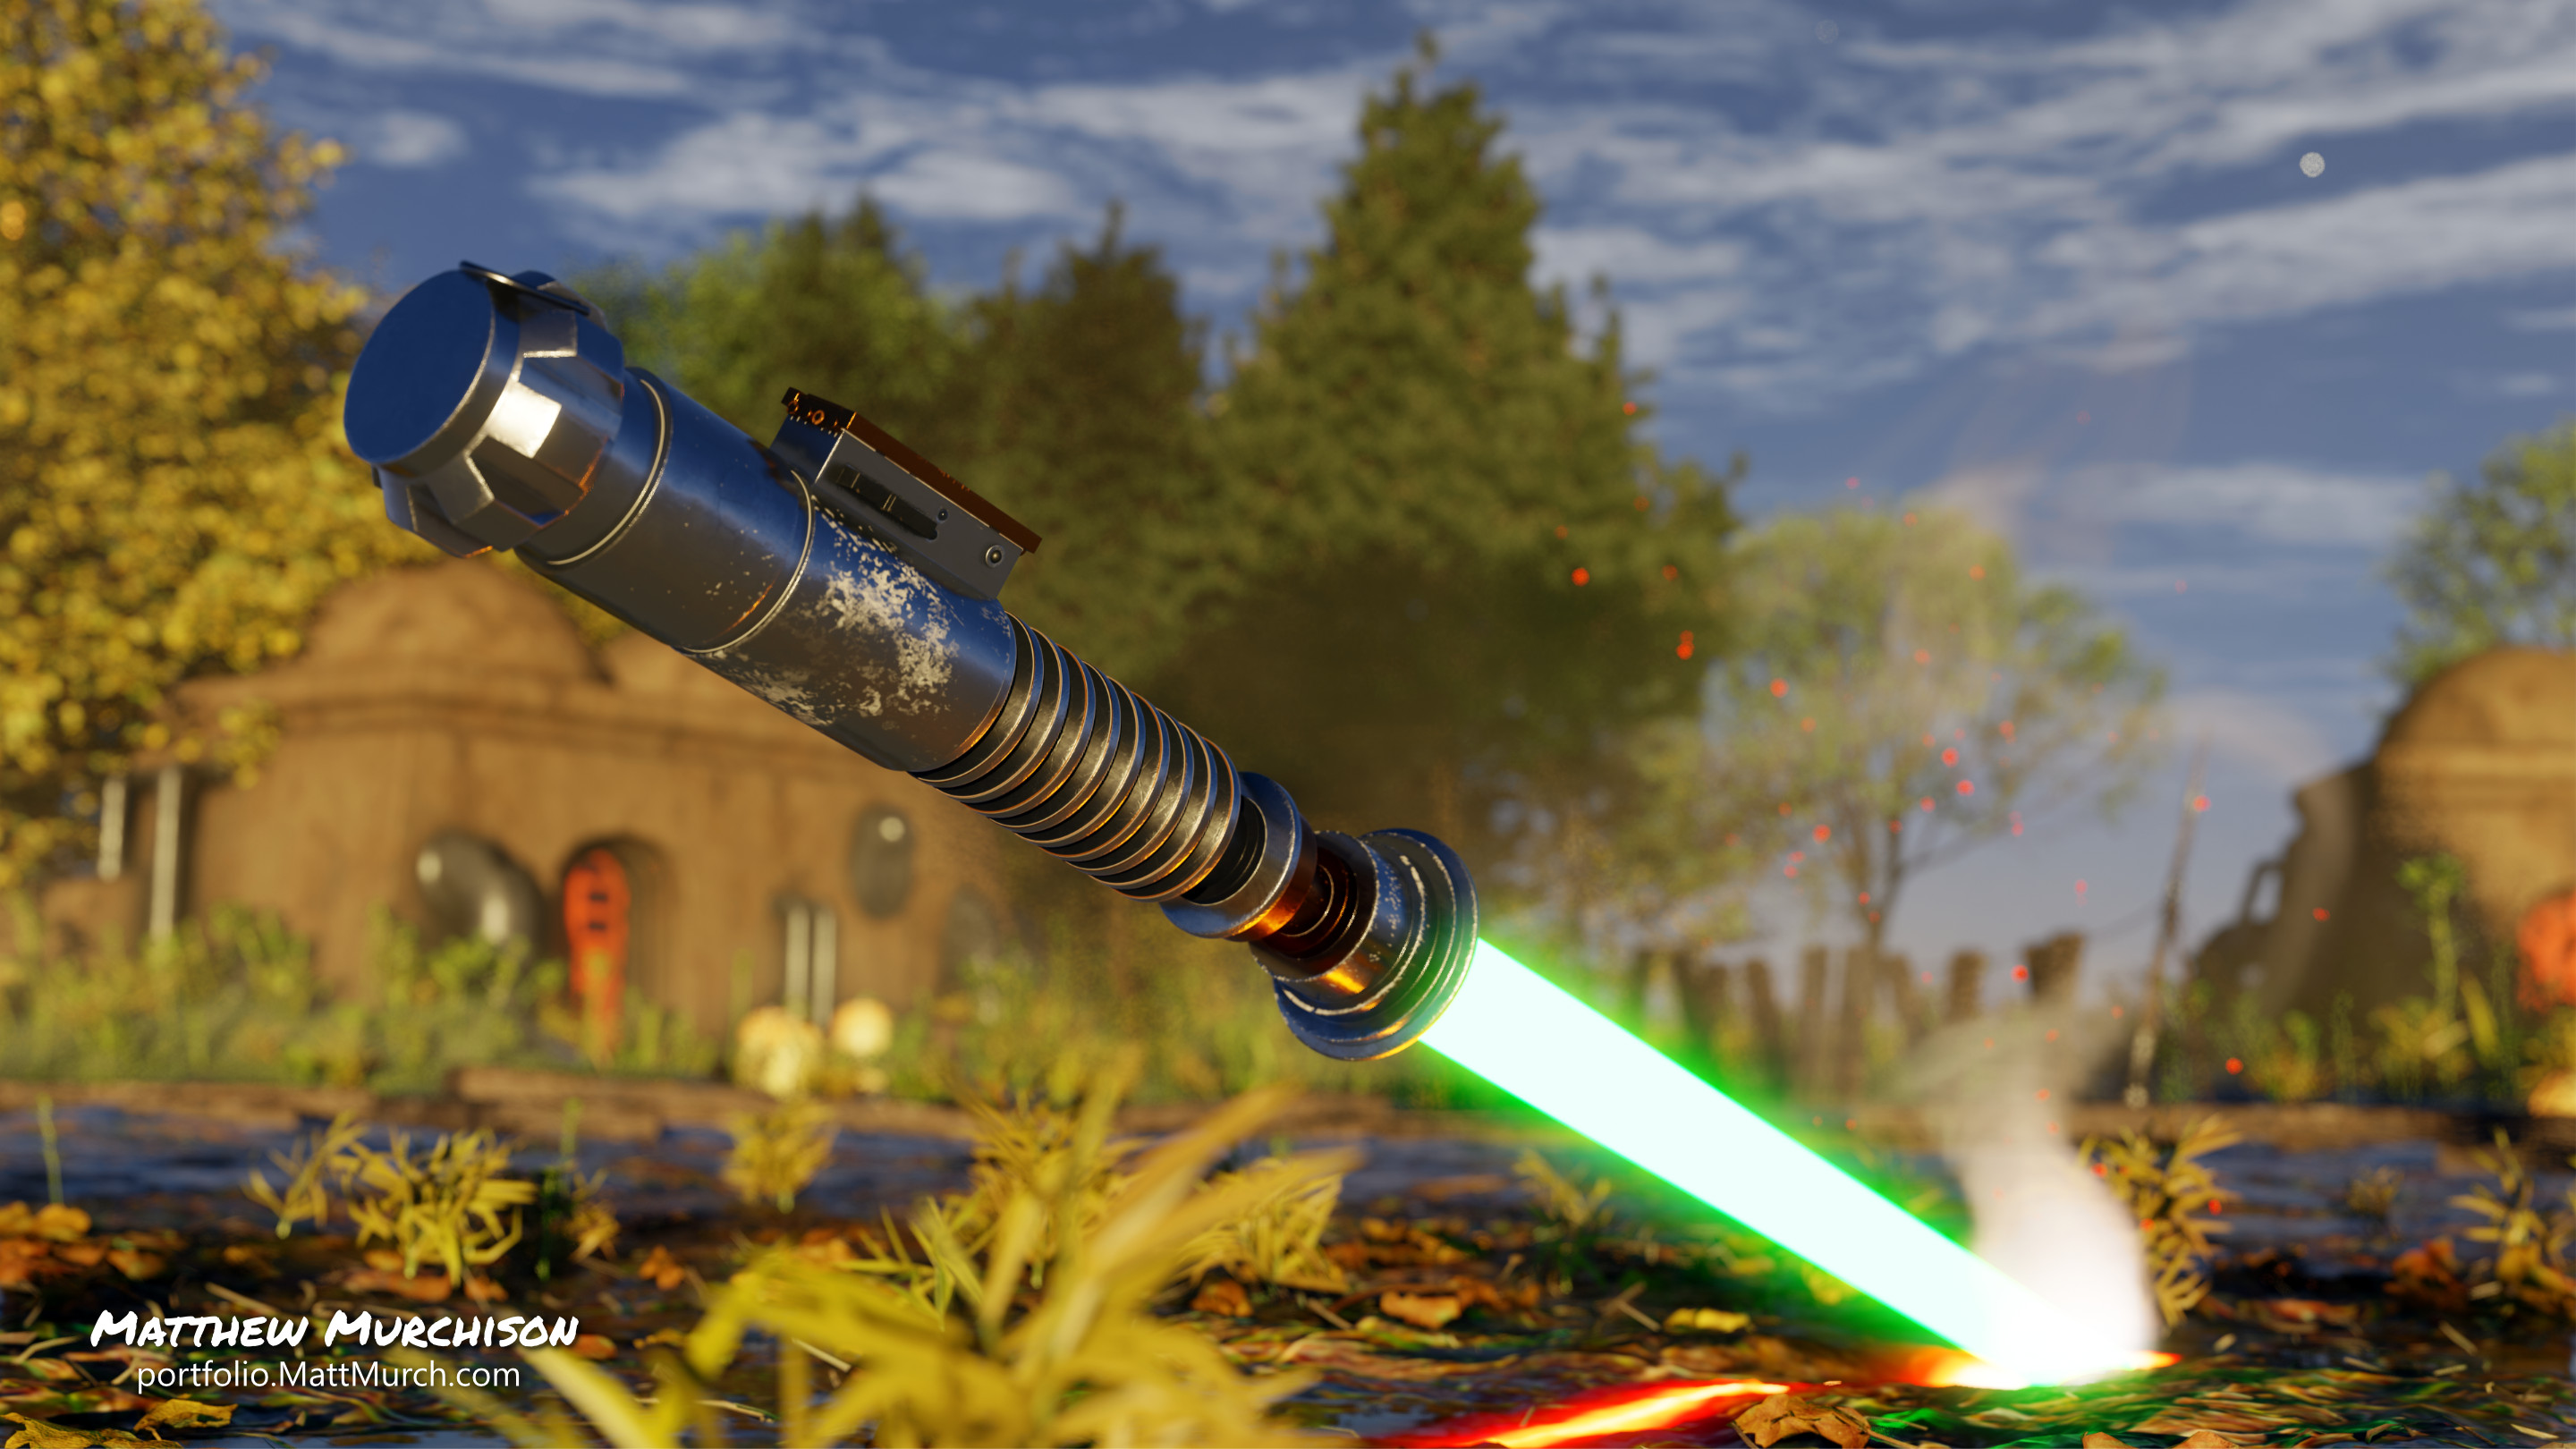 The saber in full detail.